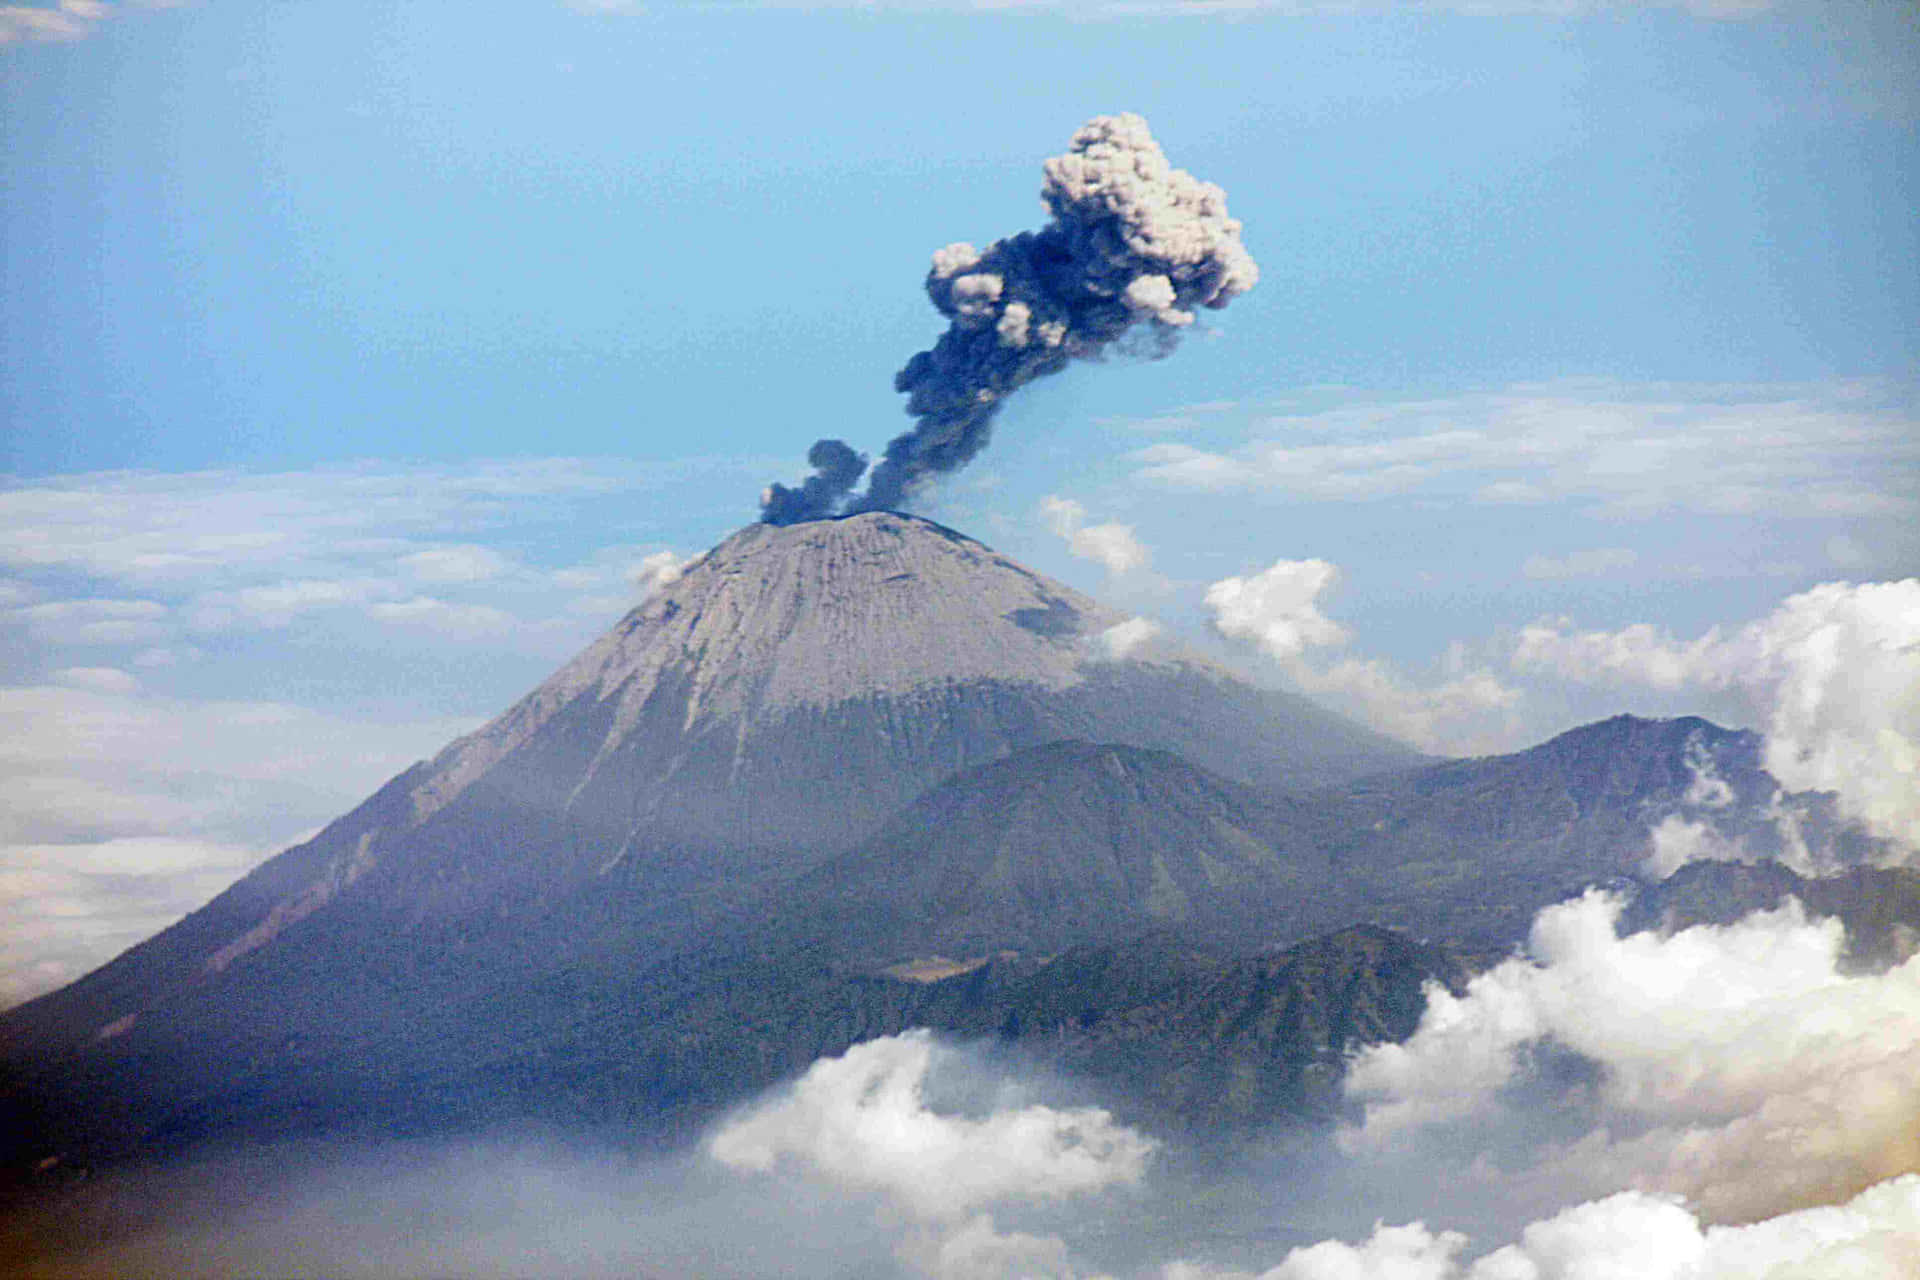 A phenomenon of our fascinating planet - an erupting volcano.